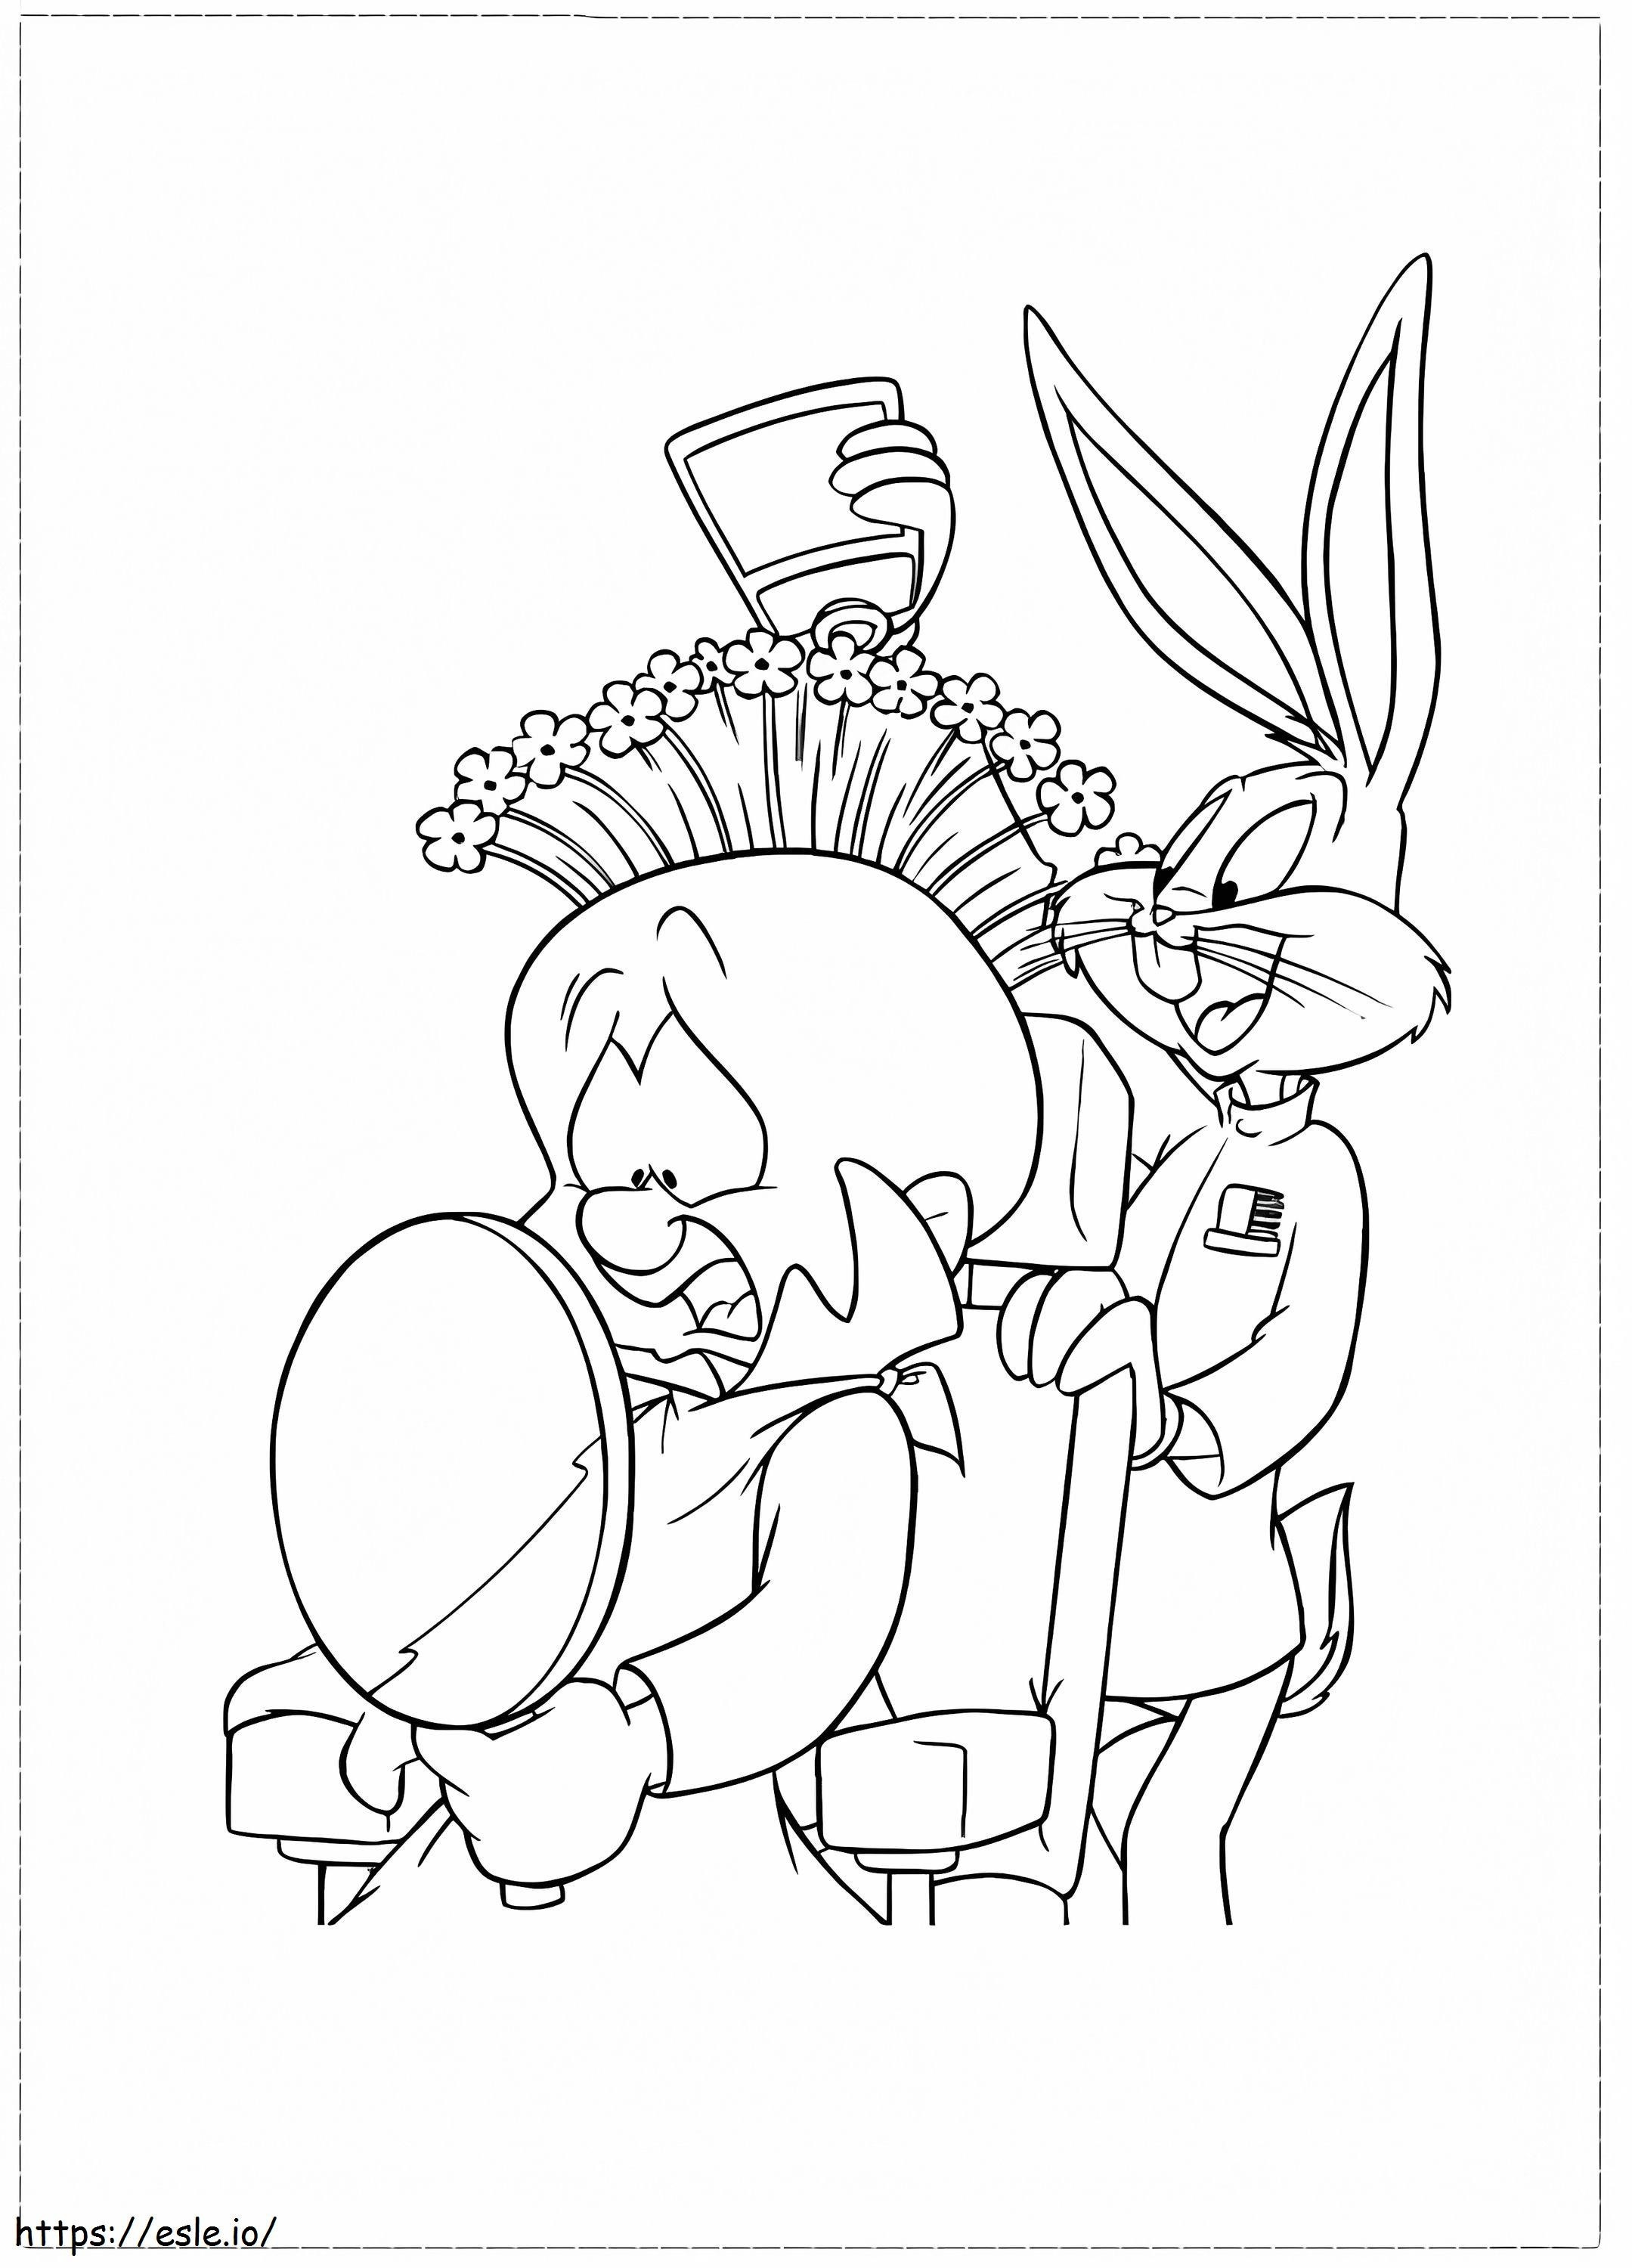 Bugs Bunny And Elmer Fudd 1 coloring page